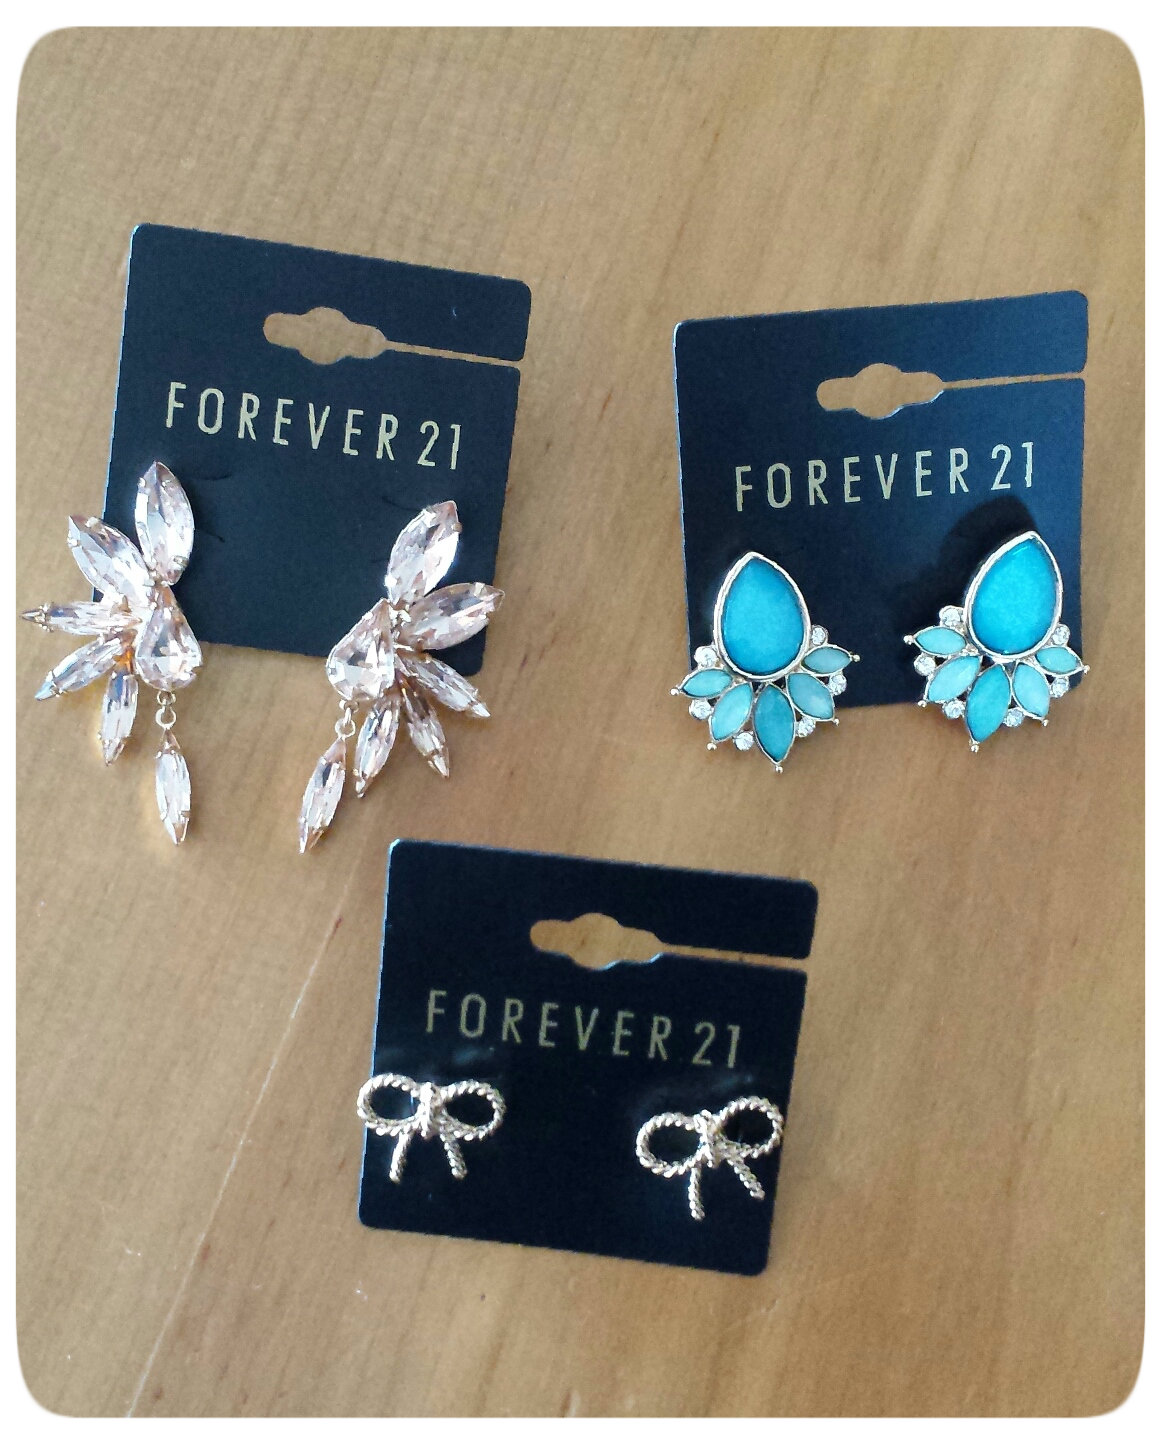 The Retro Suitcase: Thrifty Treat Of The Week: Jewellery At Forever 21